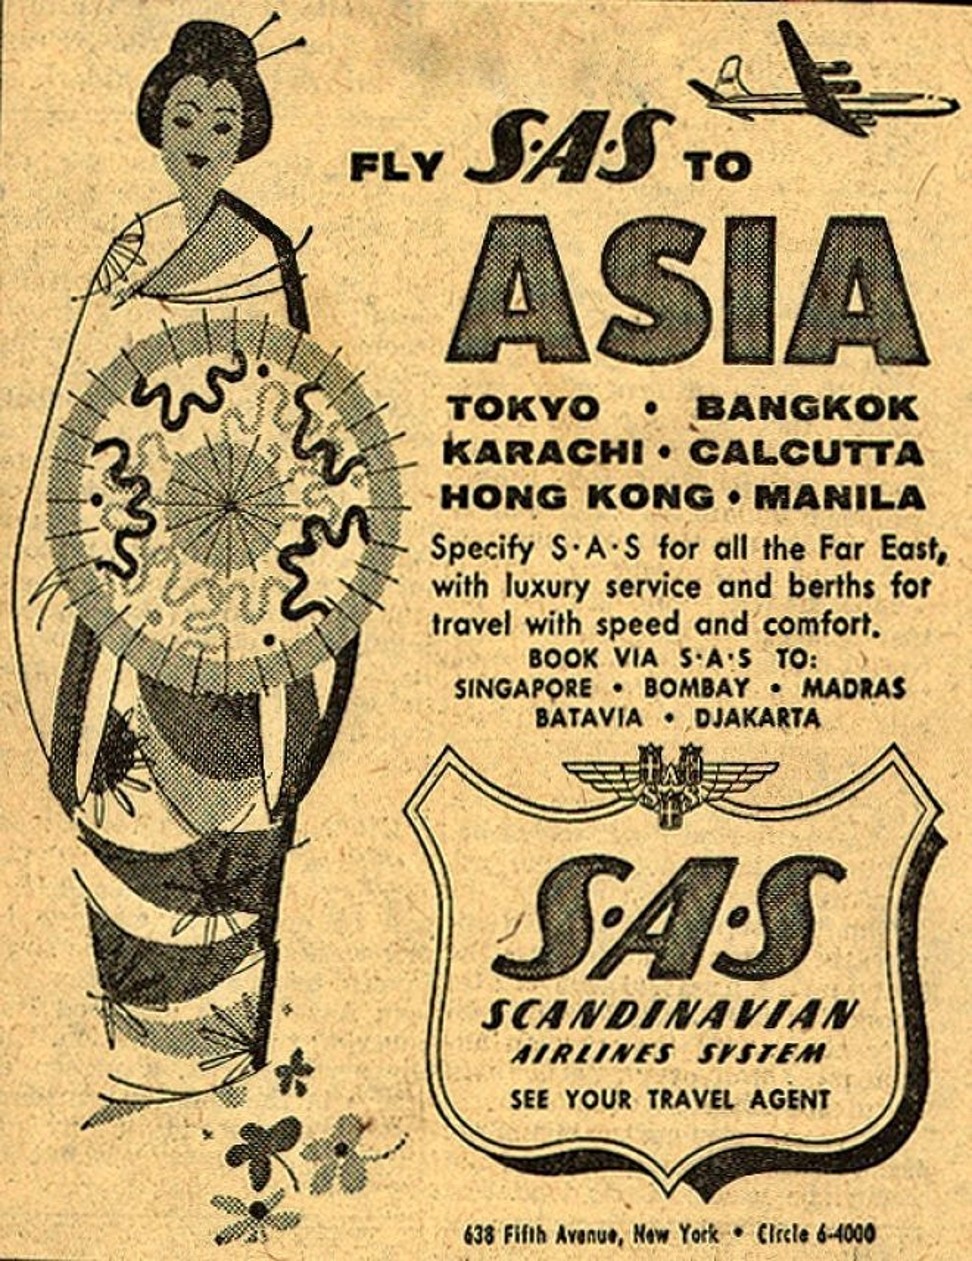 An advertisement announcing Scandinavian Airlines’ Asia routes.